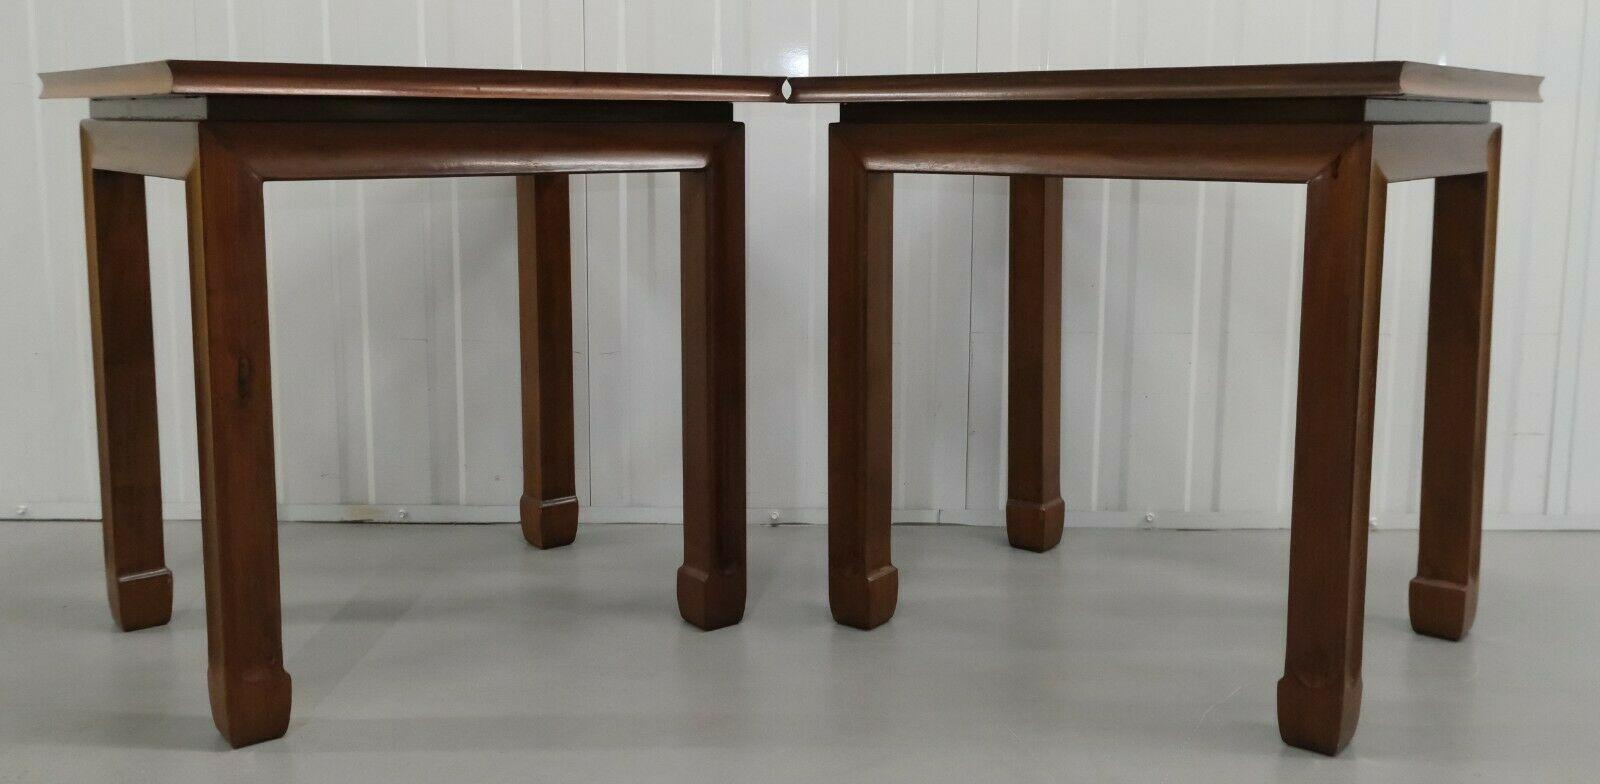 We are delighted to offer for sale this lovely pair of Chinese hardwood glass top occasional side tables.

The bevelled plate glass is placed on a beautiful latticework tops, giving them a very attractive and decorative figure that can be suitable